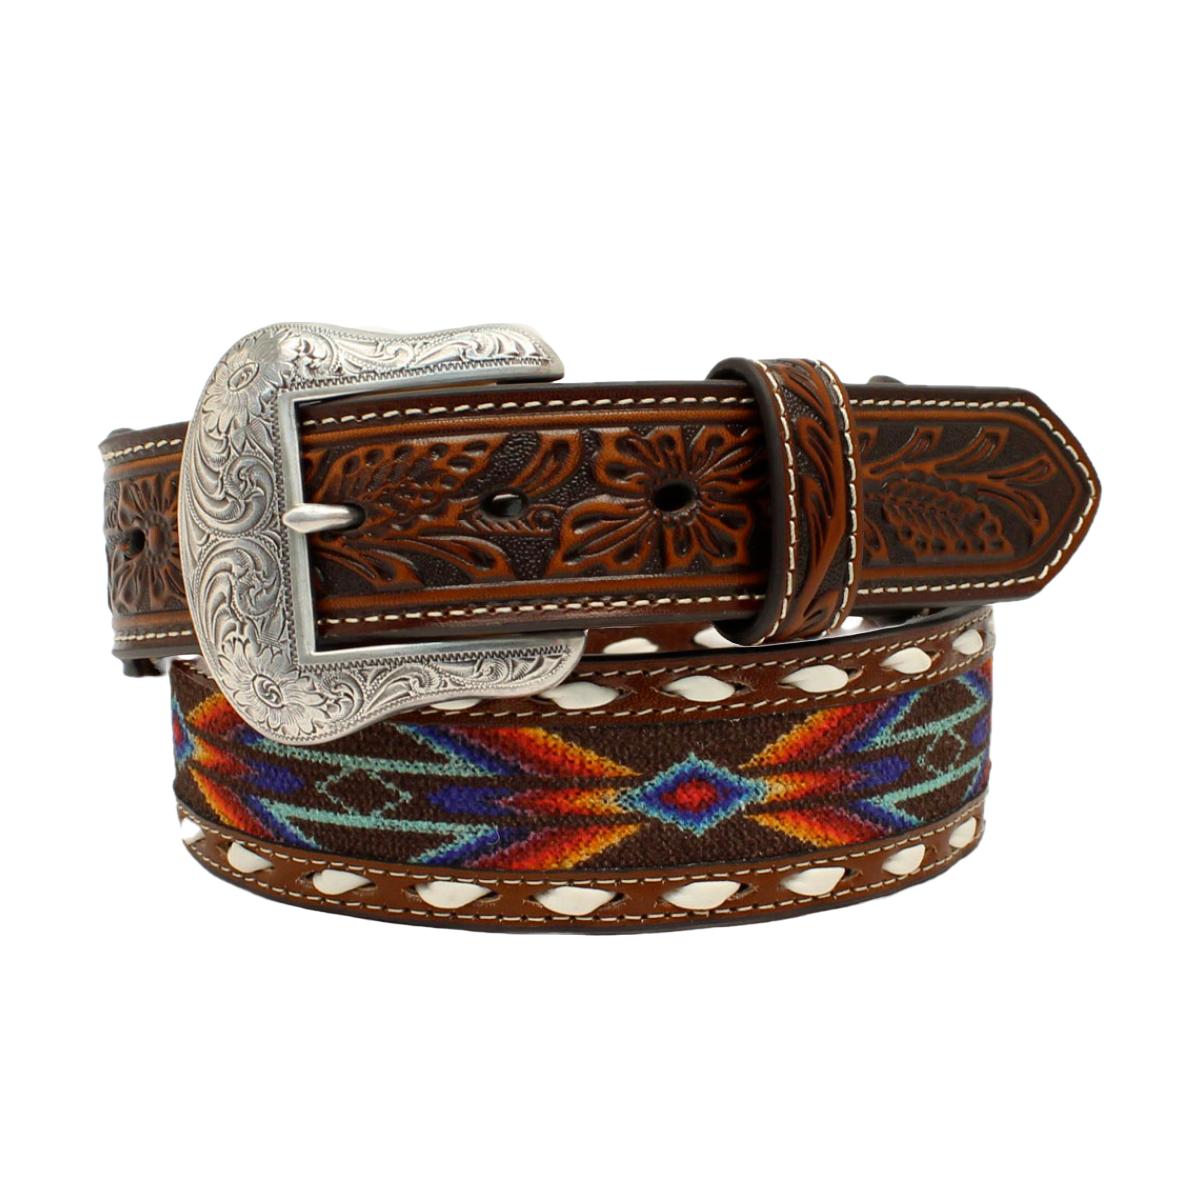 Nocona Men's Leather Laced Embossed Multi Colored Belt N210002697